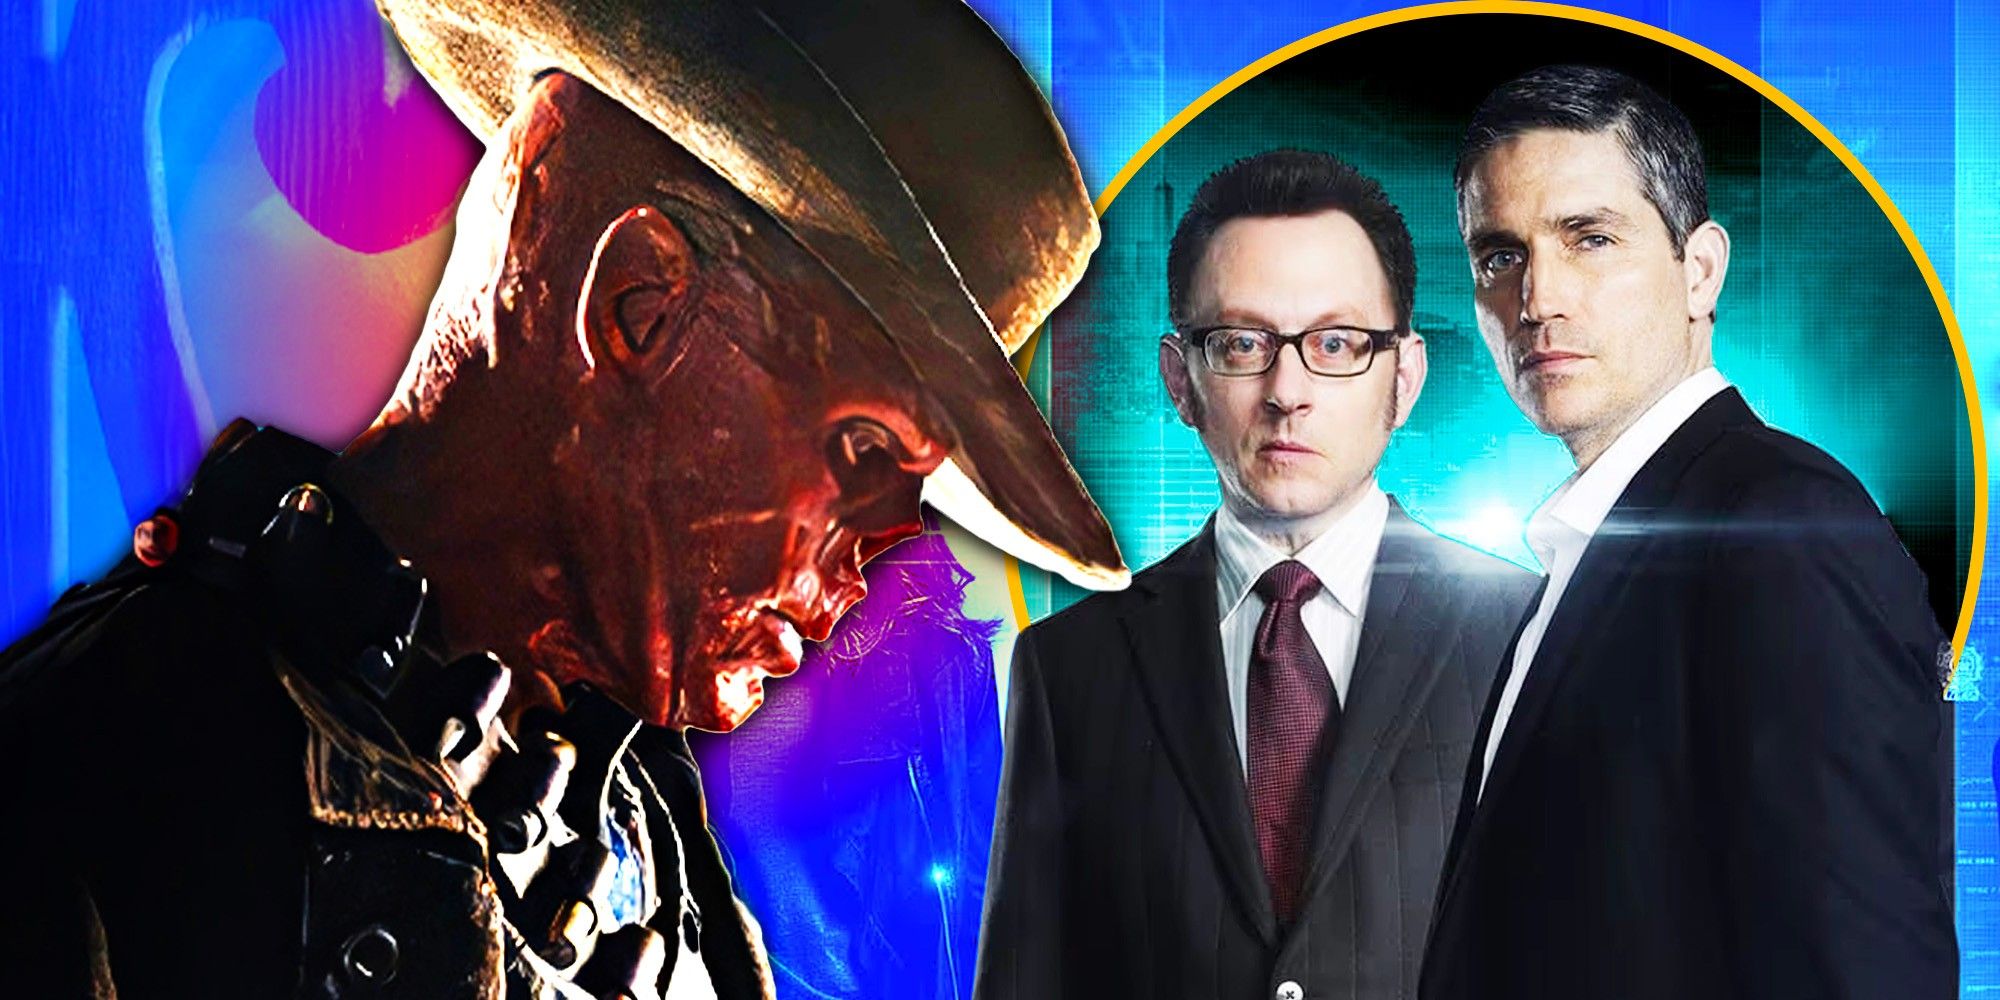 The Ghoul from Fallout and Michael Emerson and Jim Caviezel from Person of Interest